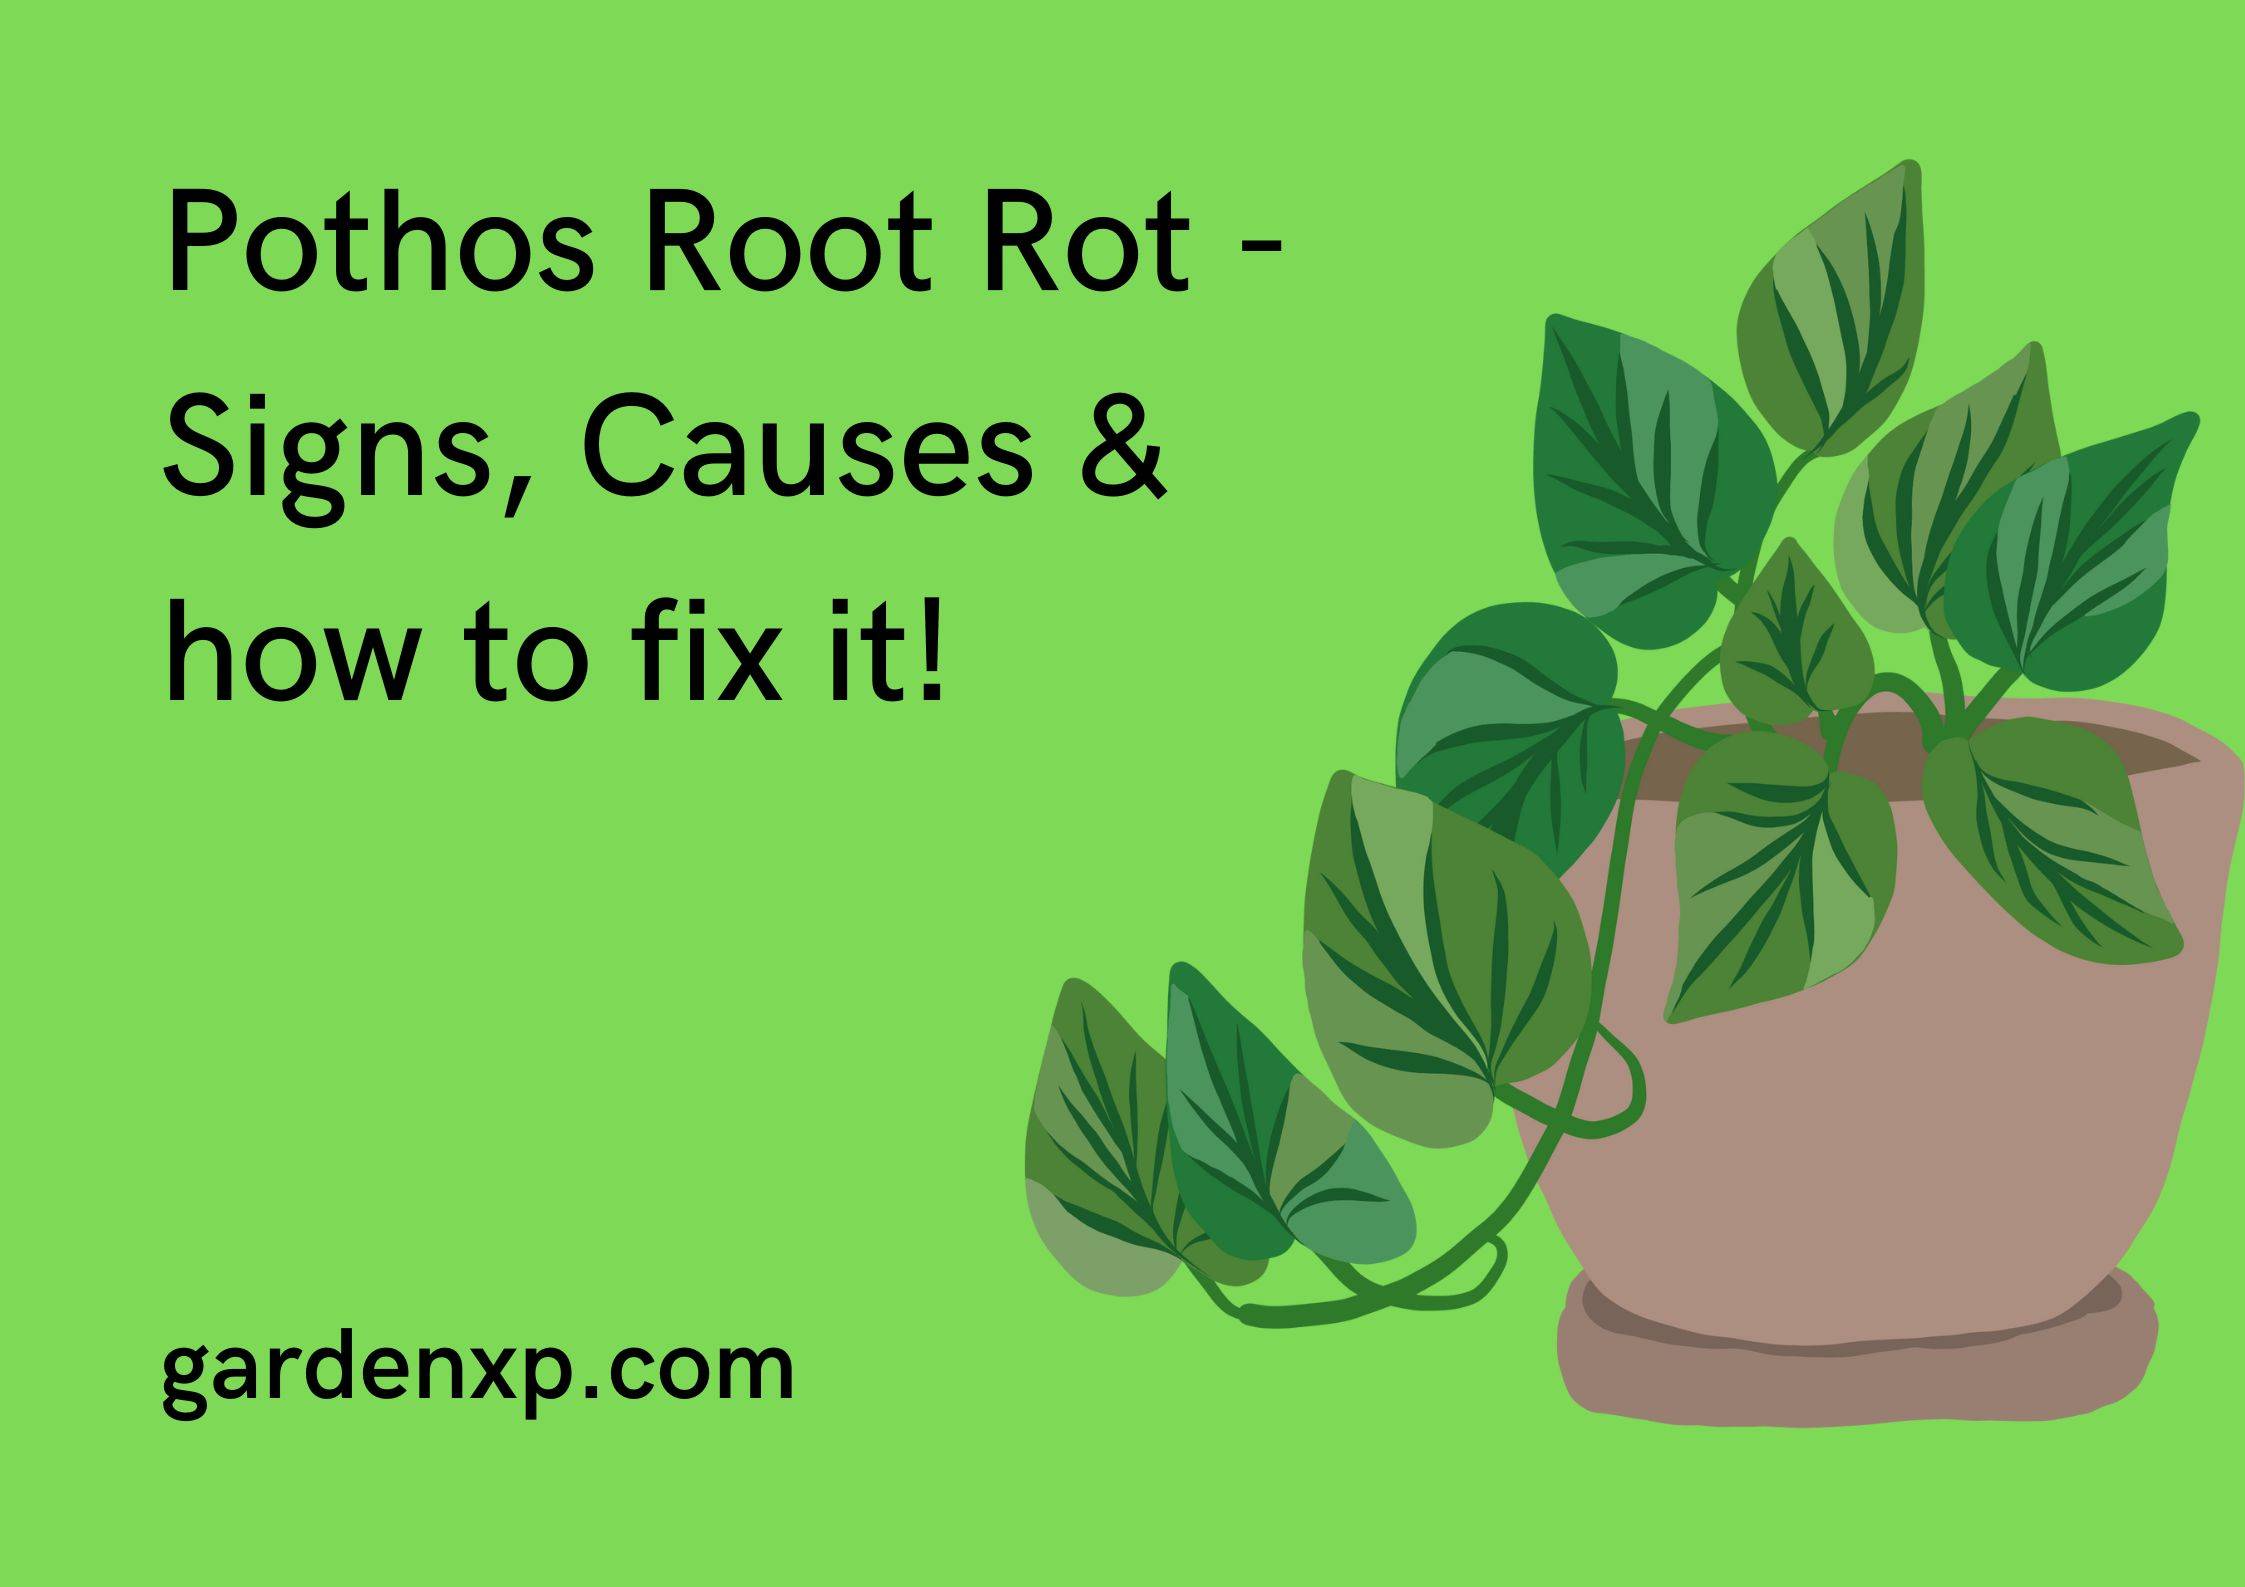 Pothos Root Rot - Signs Causes & how to fix it!